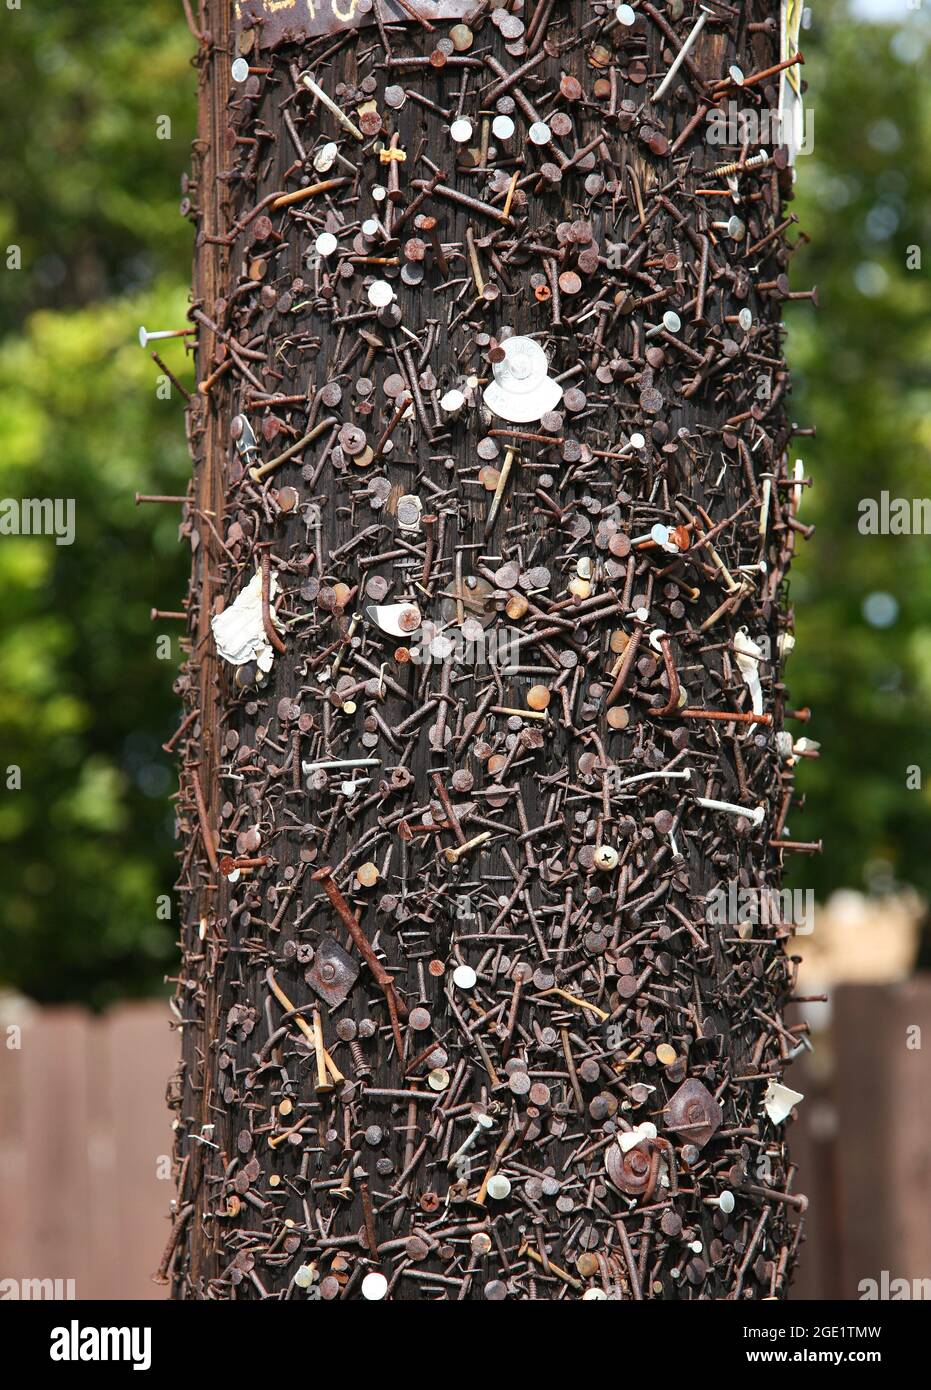 Rusty nails and screws on telephone pole in Costa Mesa, CA show years of yard sale signs Stock Photo